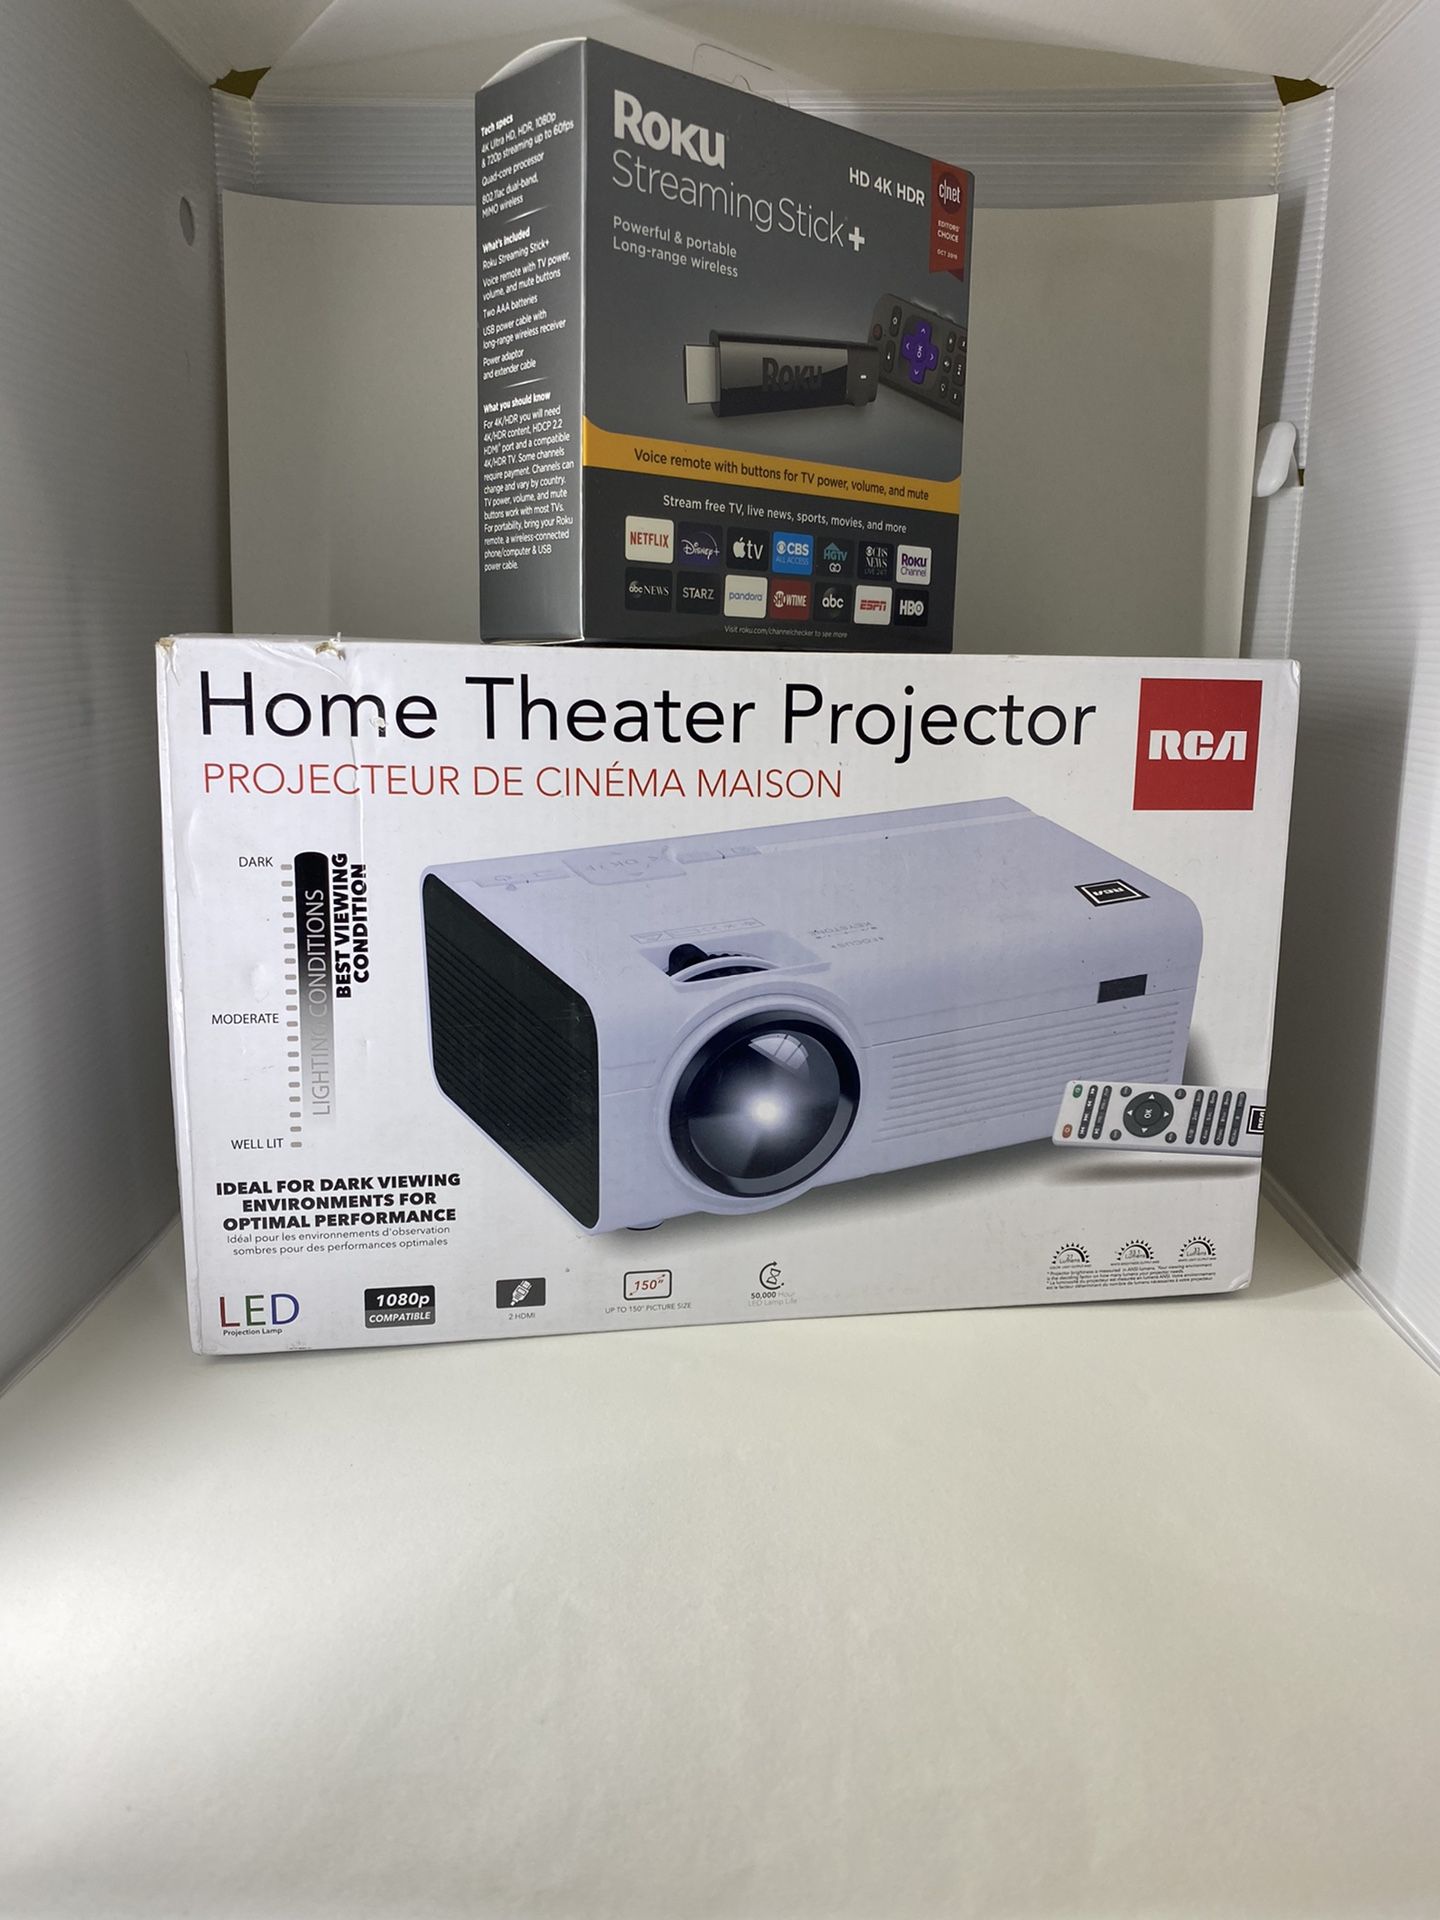 RCA Home theater projector and Roku streaming stick combo